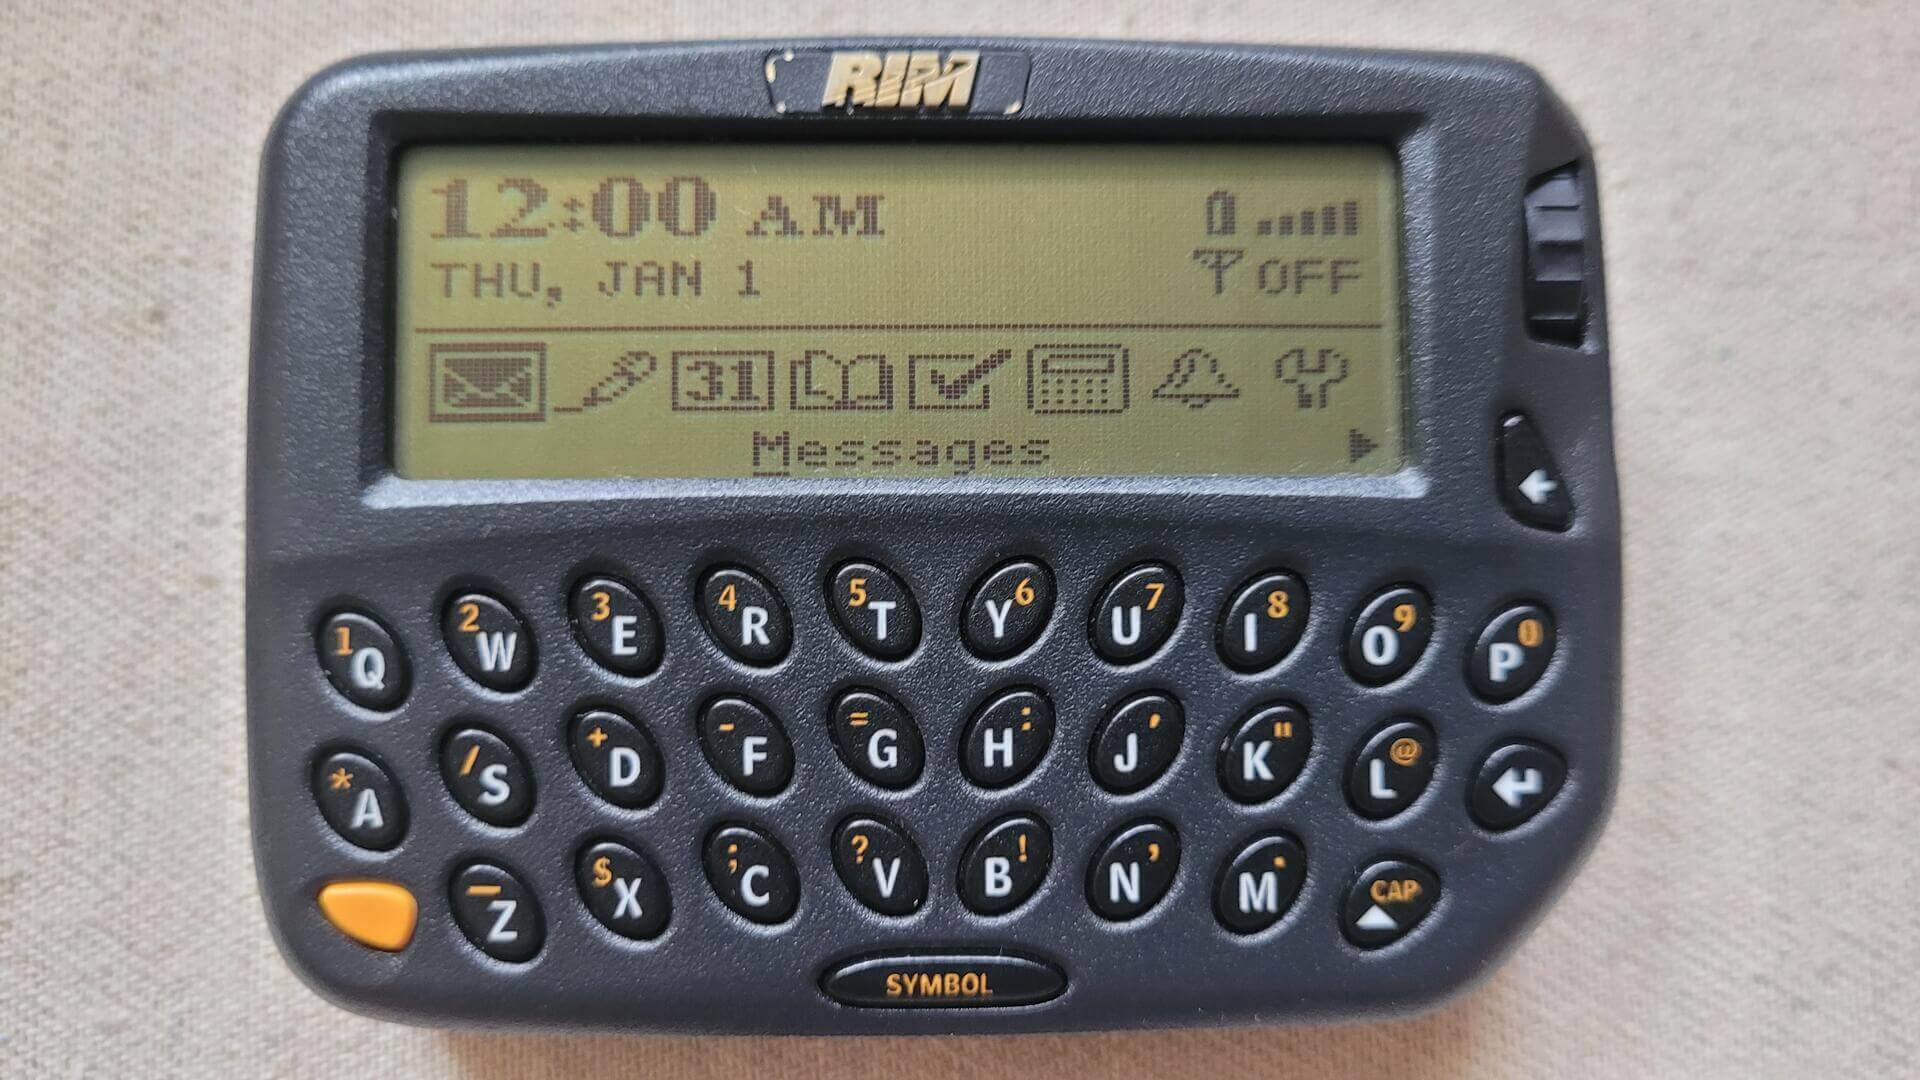 Rare Original RIM 950 BlackBerry Inter@ctive two way pager PDA w Holster - 1998 Blackberry Vintage Canadiana and Collectible Electronic Gadgets and Devices